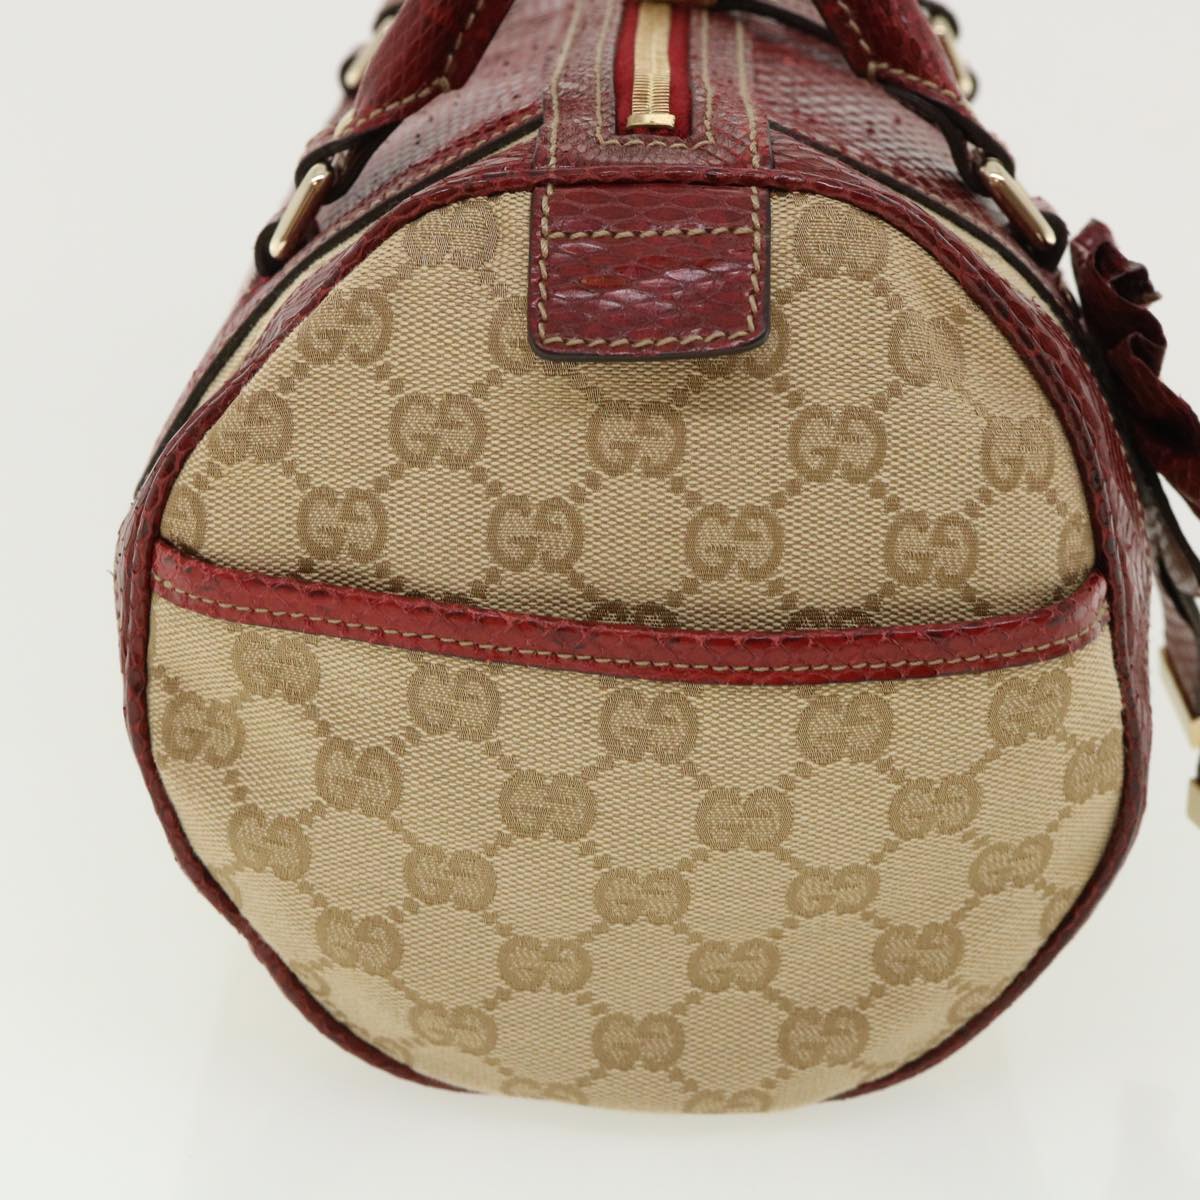 GUCCI GG Canvas Hand Bag Snake skin Beige Red 189825002122 Auth am3163